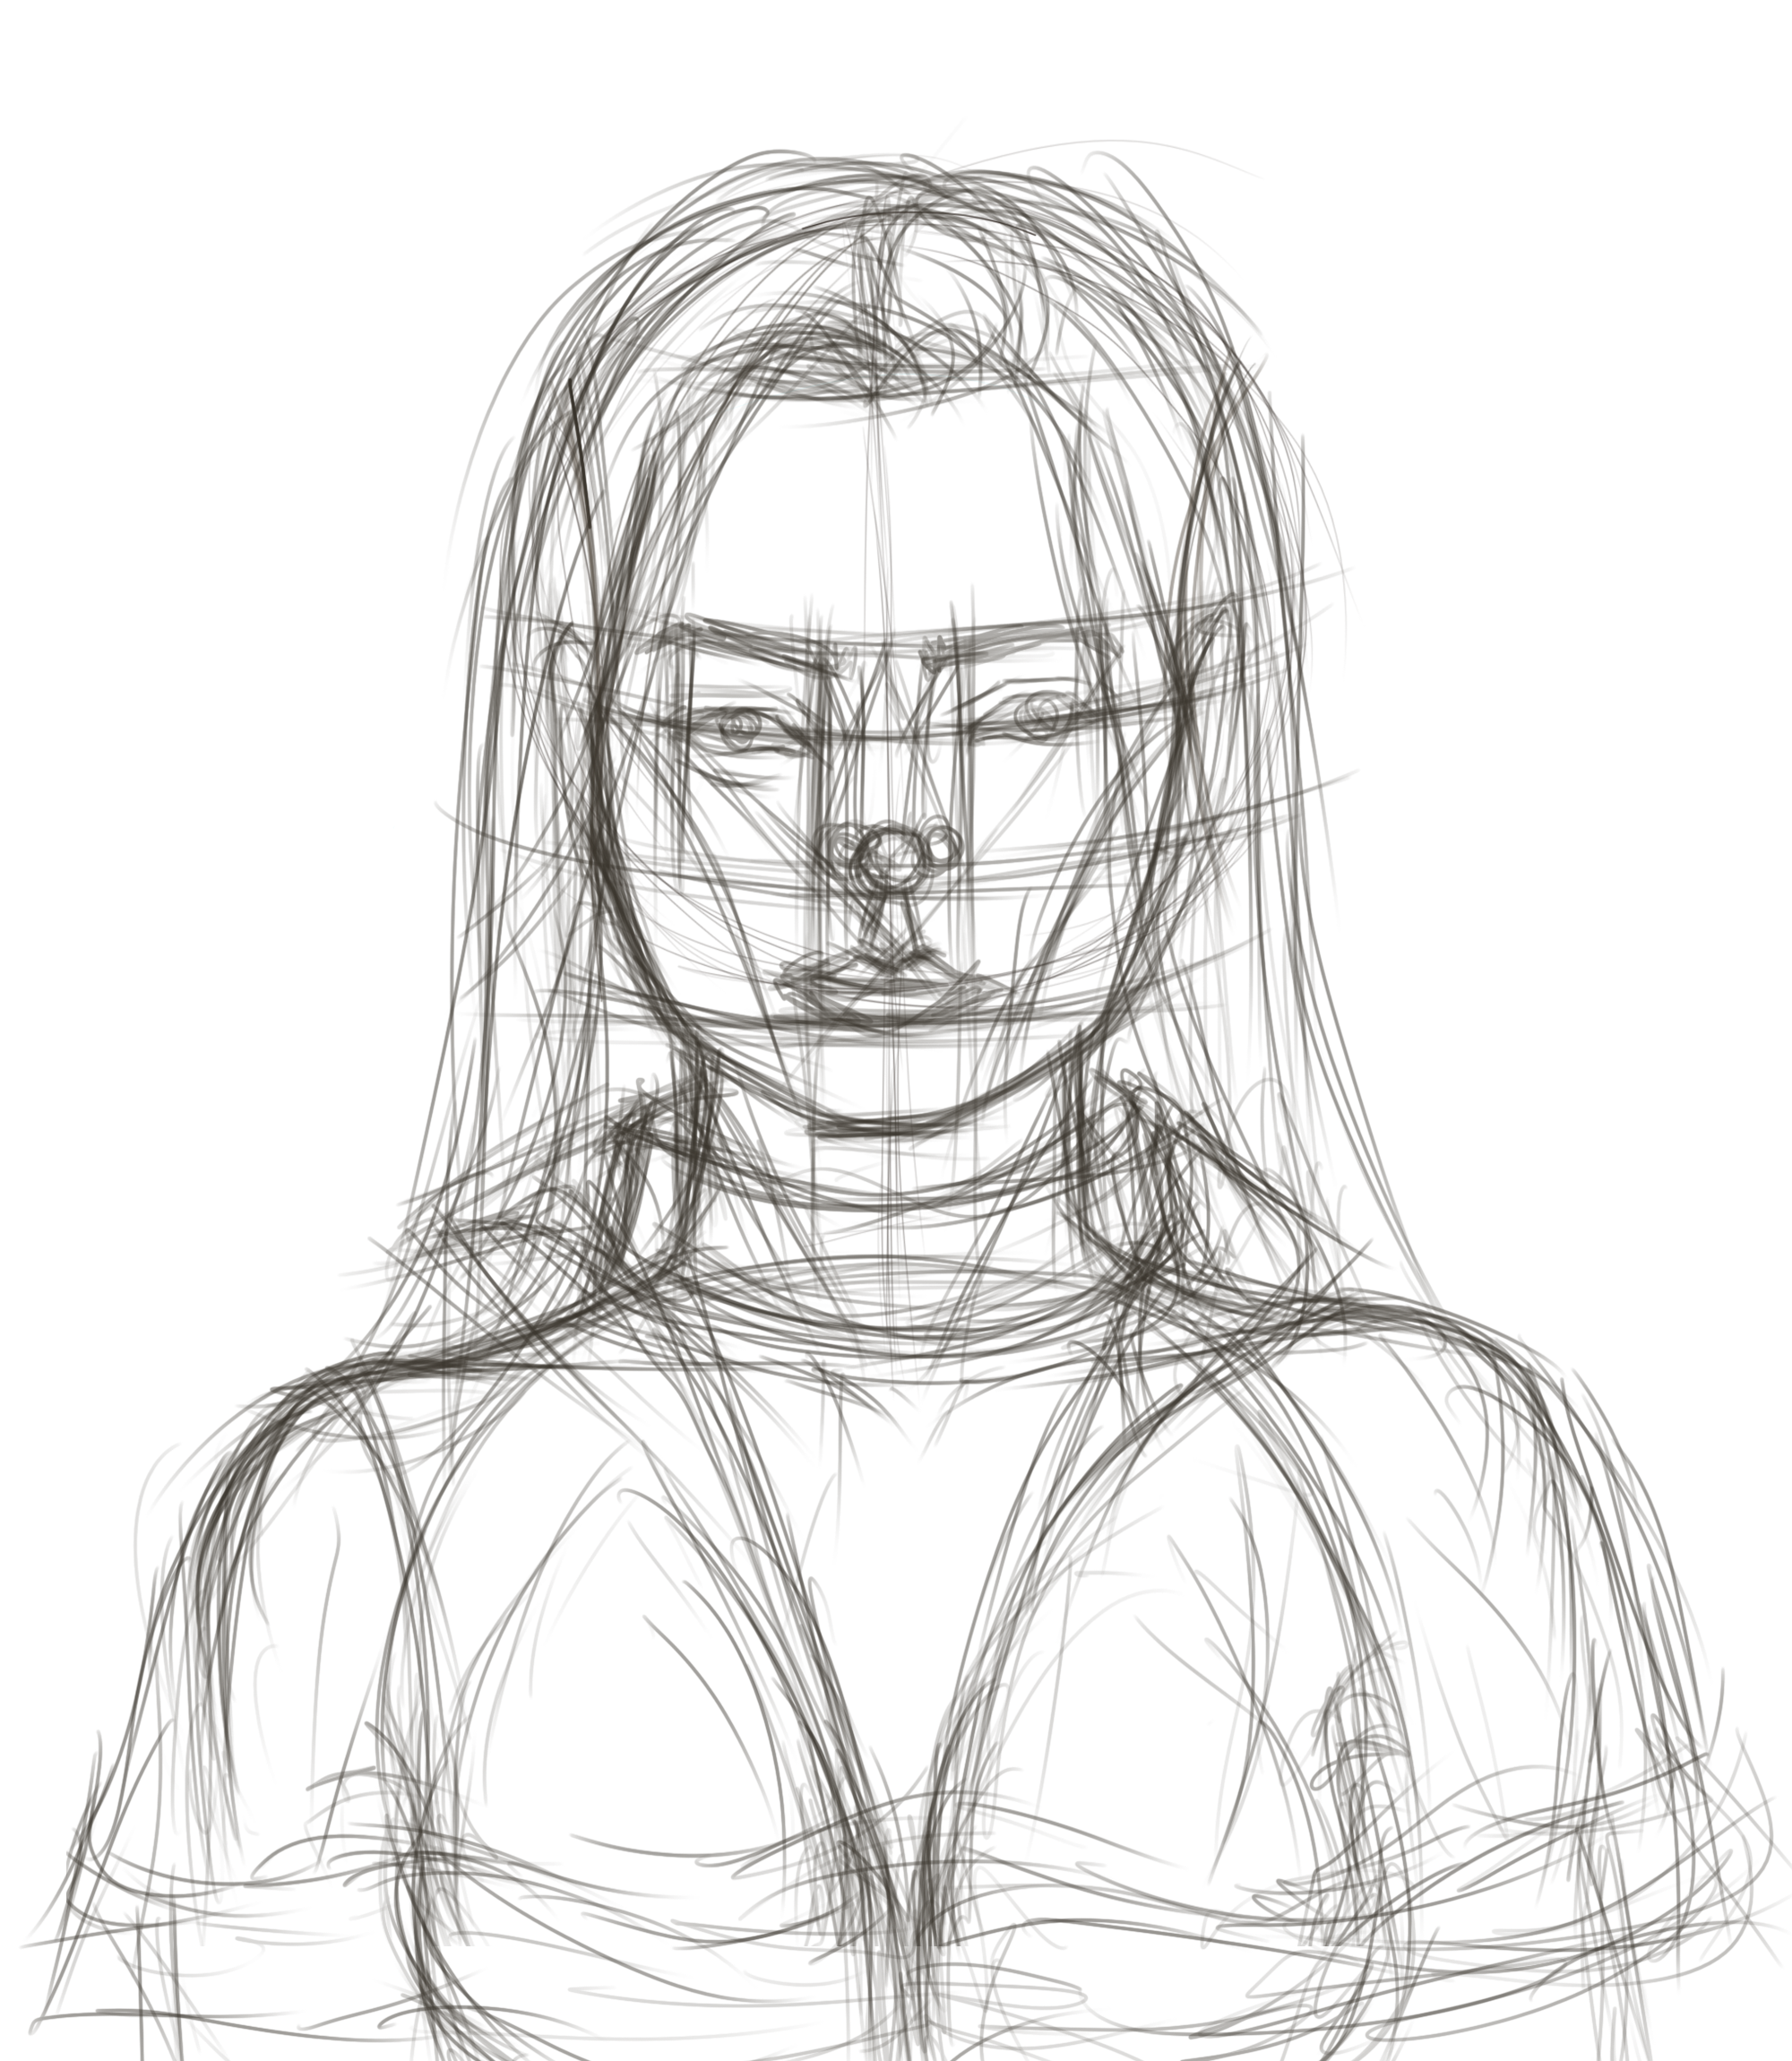 Francisftlp-Digital Drawing She Mysterious- Step 1.png